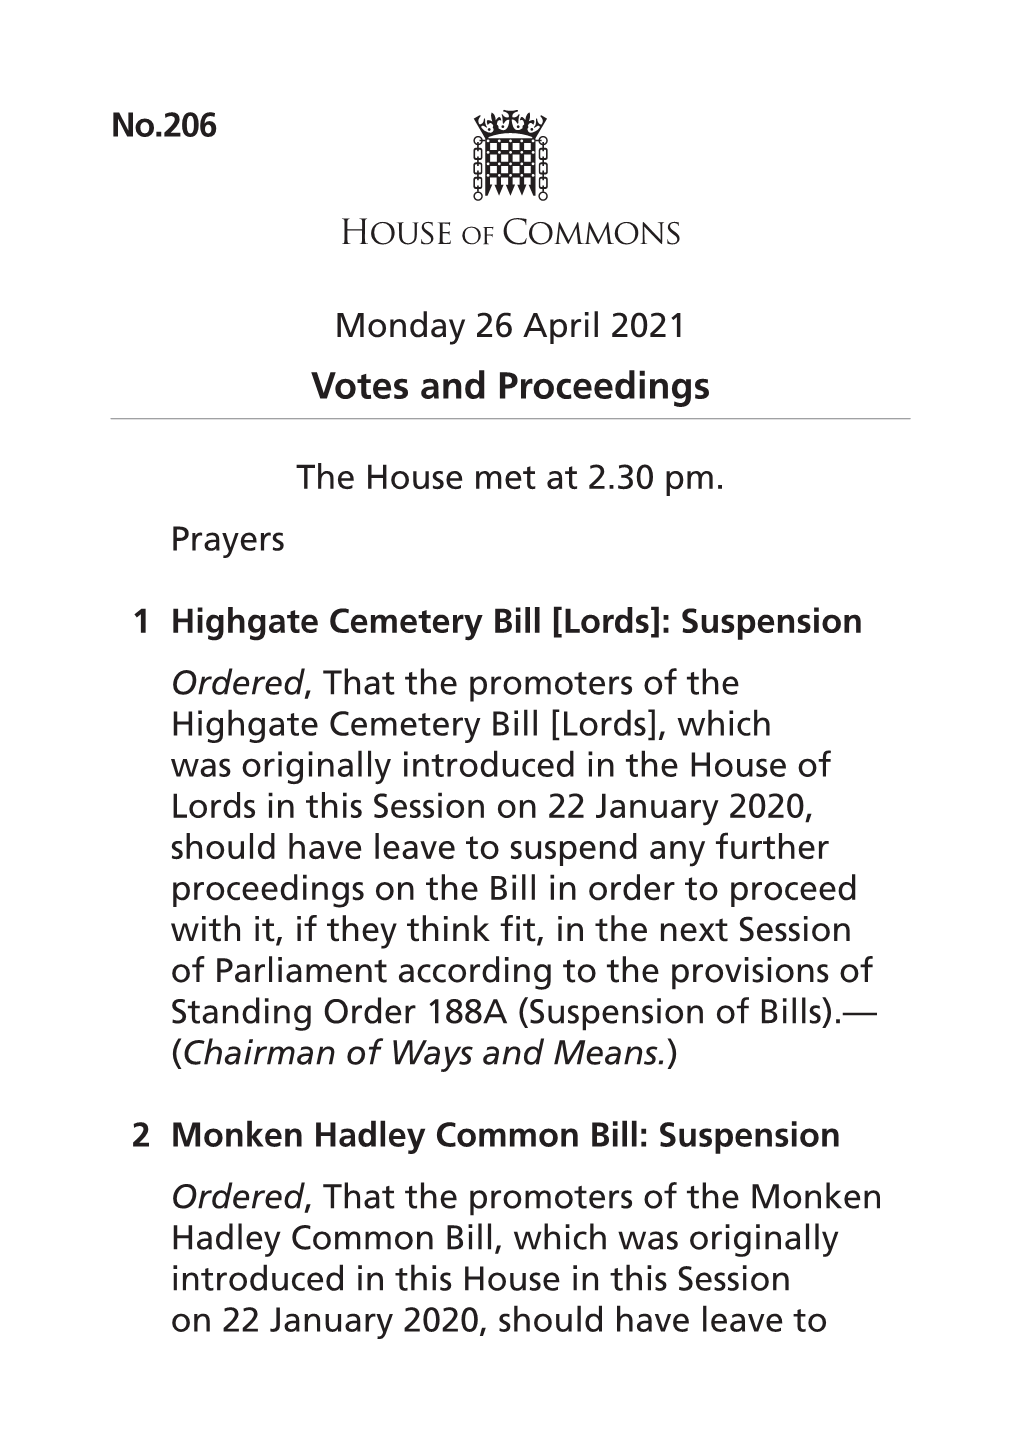 Victoria Atkins.) the Deputy Speaker Announced a Time Limit on Back-Bench Speeches (Standing Order No